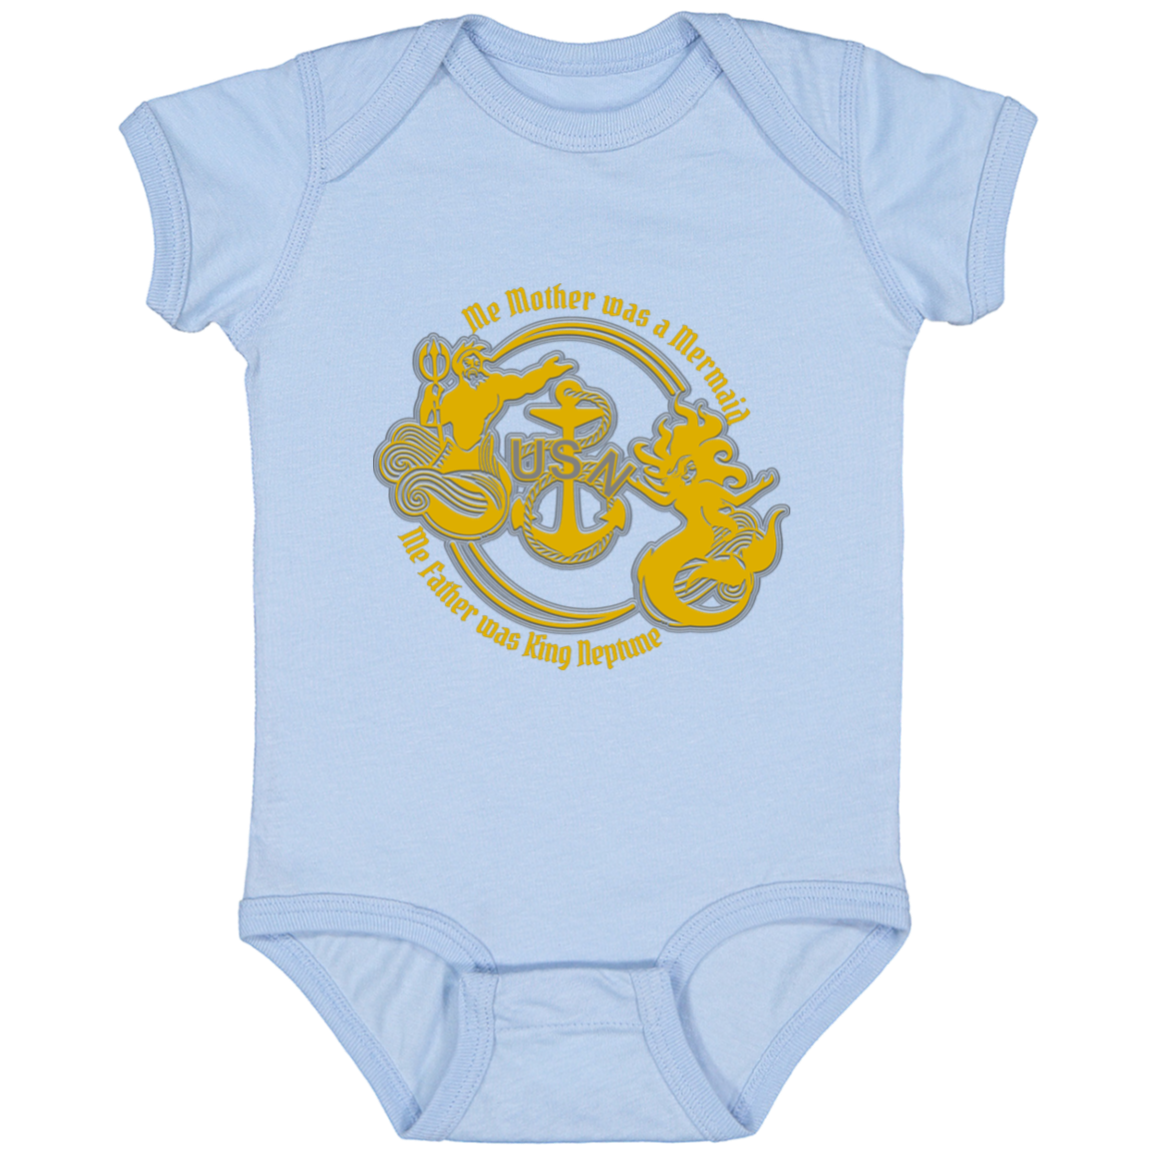 Me Mother and Father Infant Jersey Bodysuit Onsie